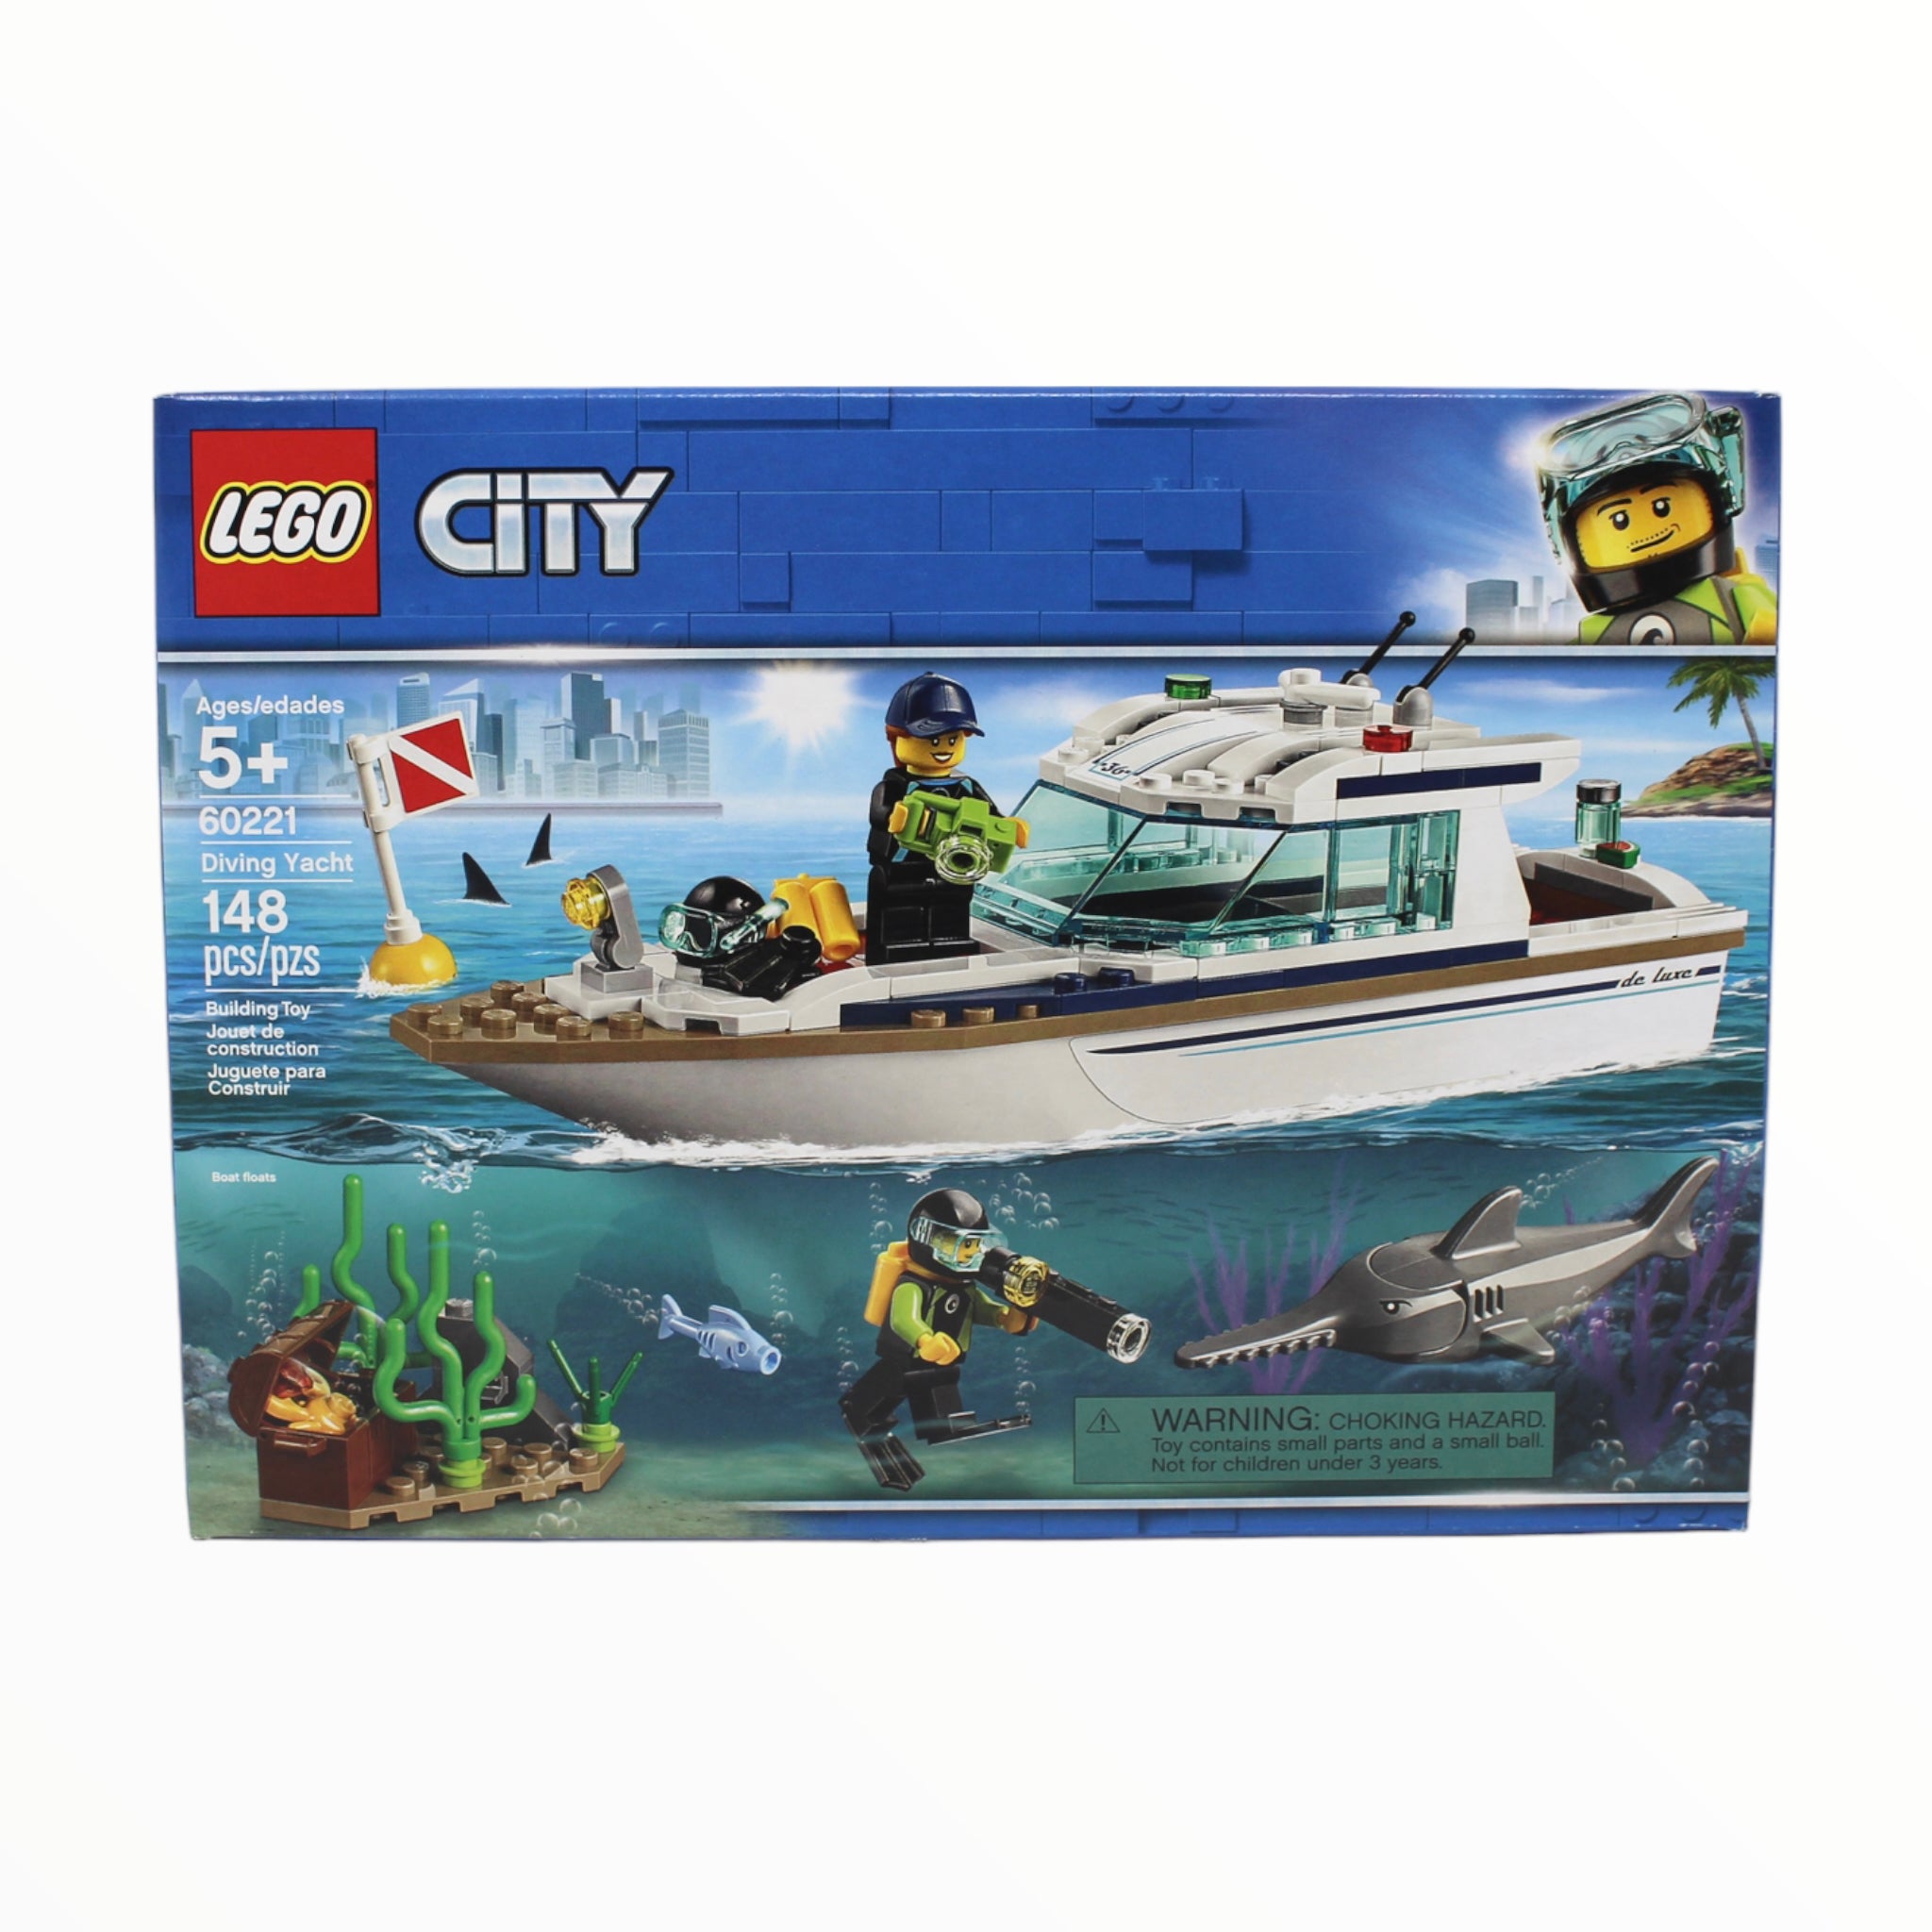 Retired Set 60221 City Diving Yacht